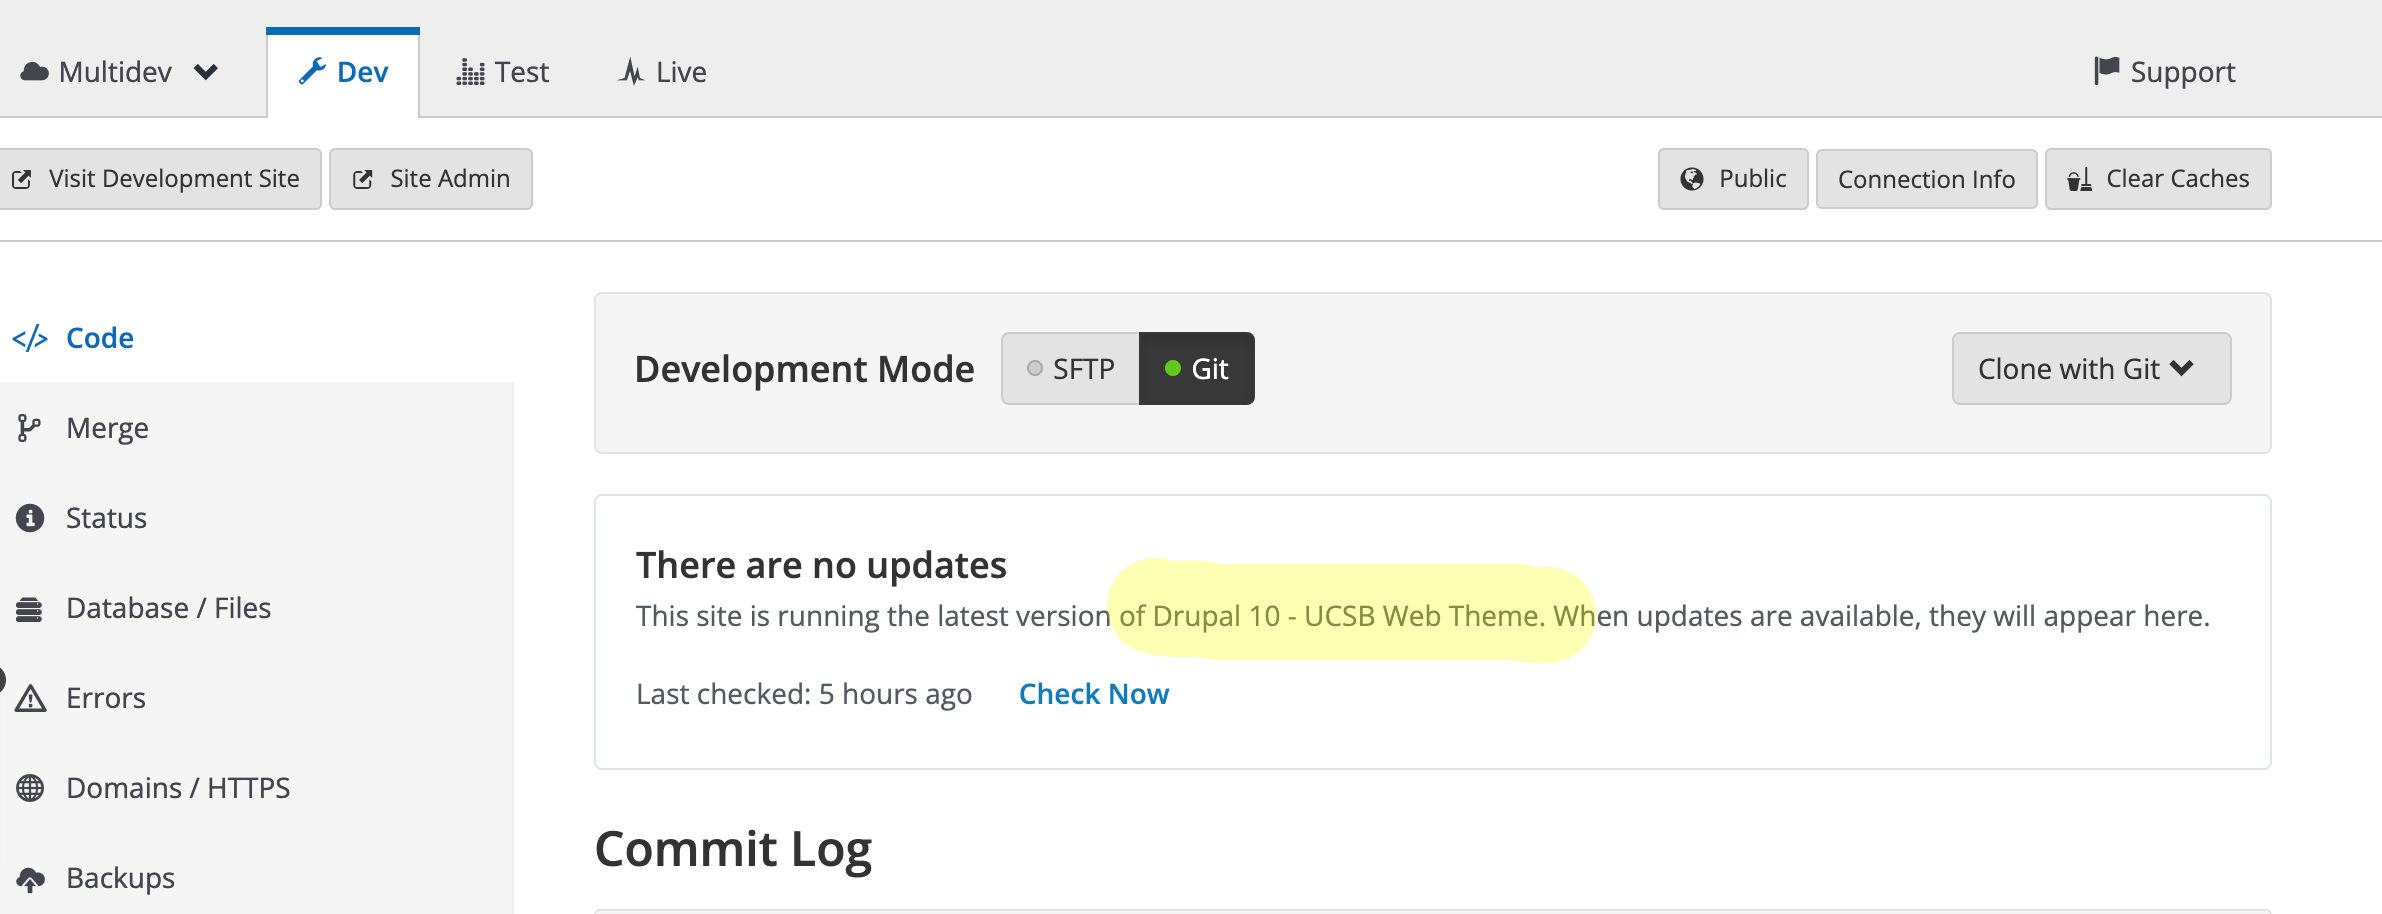 Pantheon Dashboard shows the site is using Drupal 10 Upstream